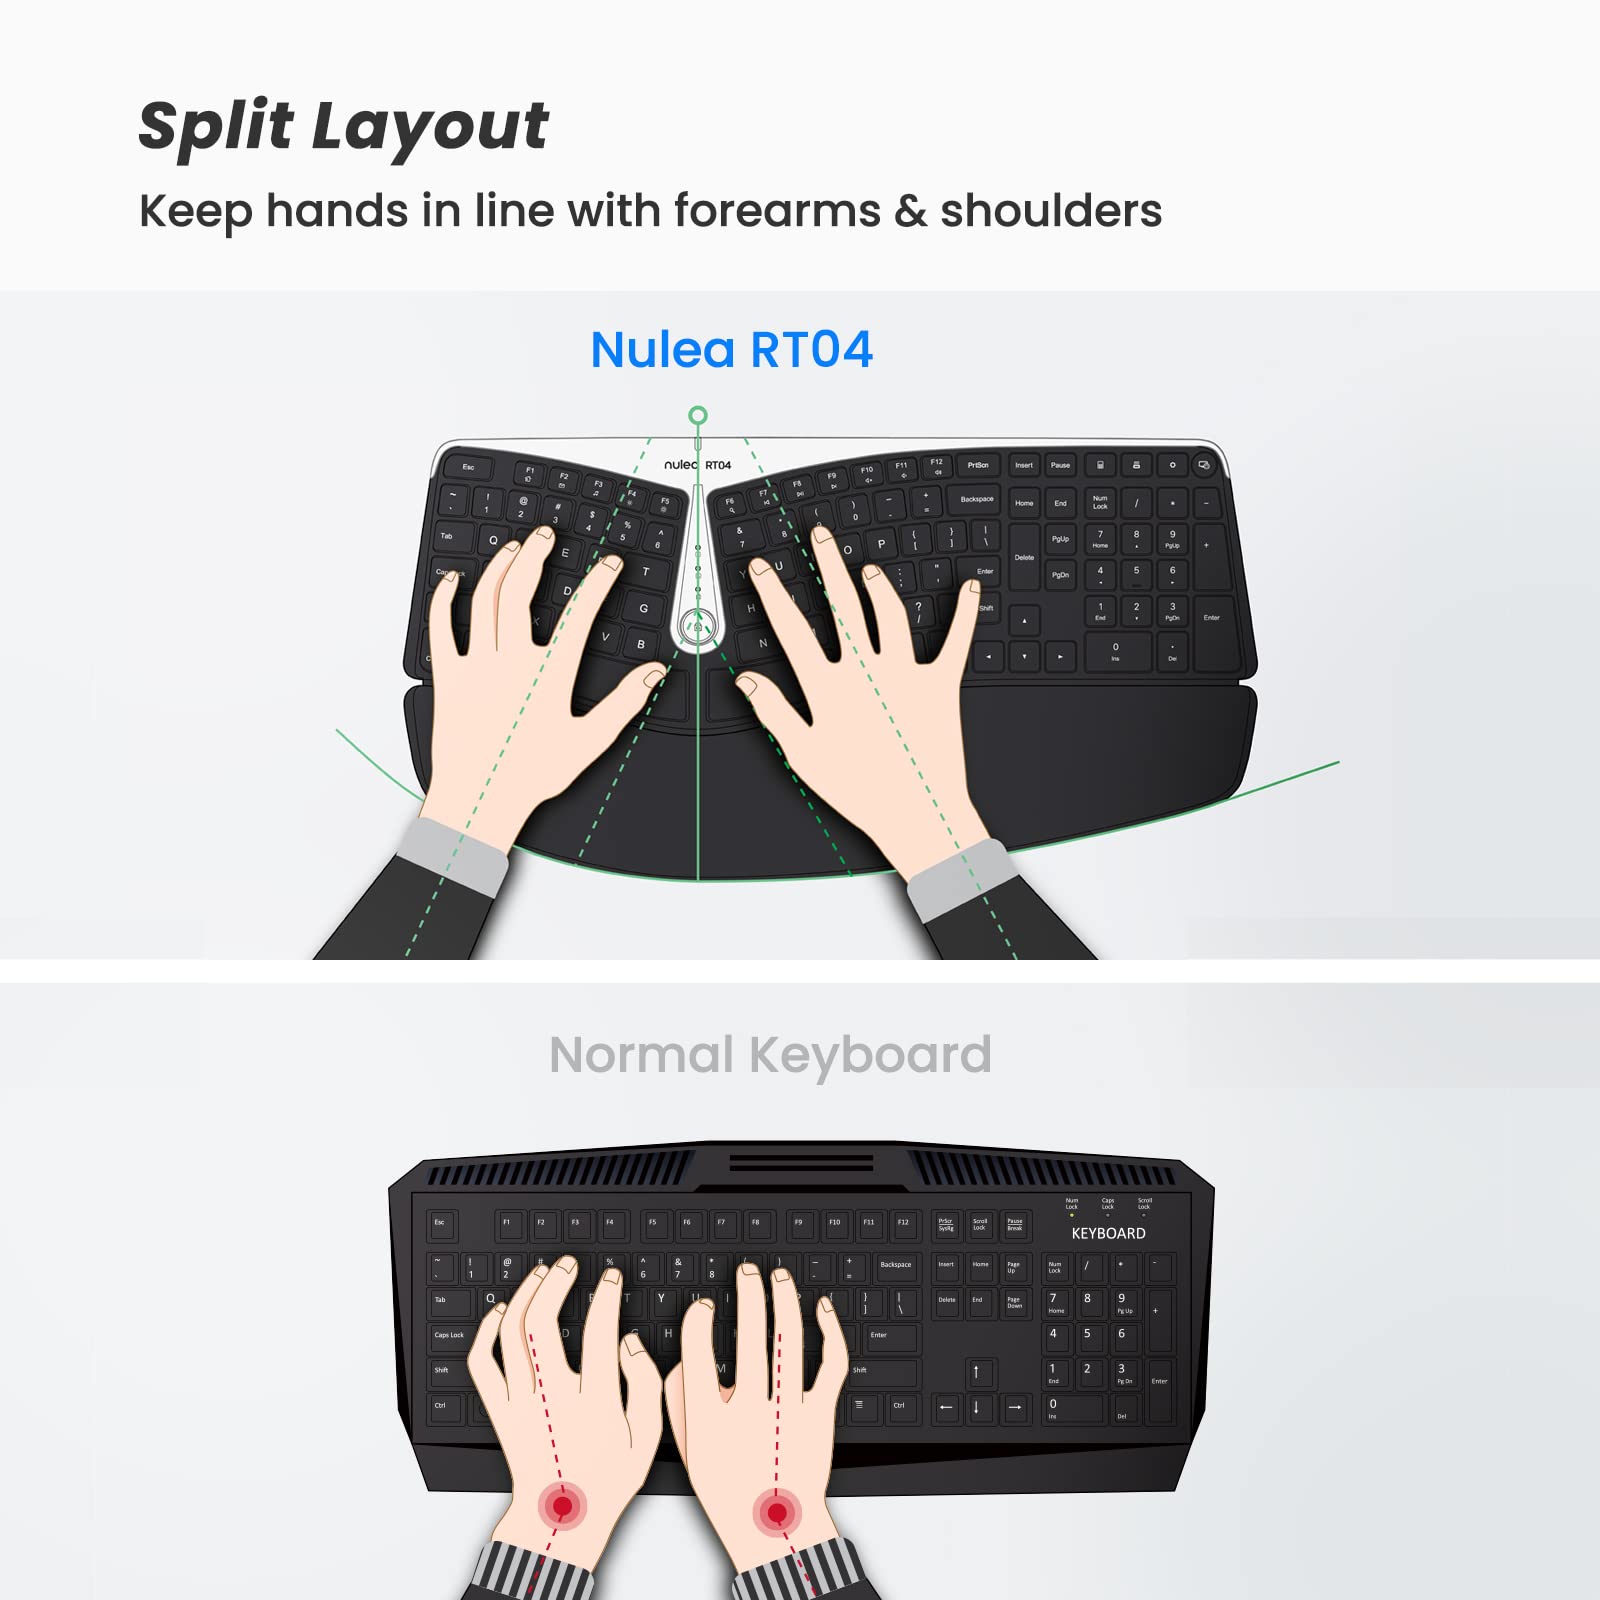 Nulea RT04 Wireless Ergonomic Keyboard, 2.4G Split Keyboard with Cushioned Wrist and Palm Support, Arched Keyboard Design for Natural Typing, Compatible with Windows/Mac